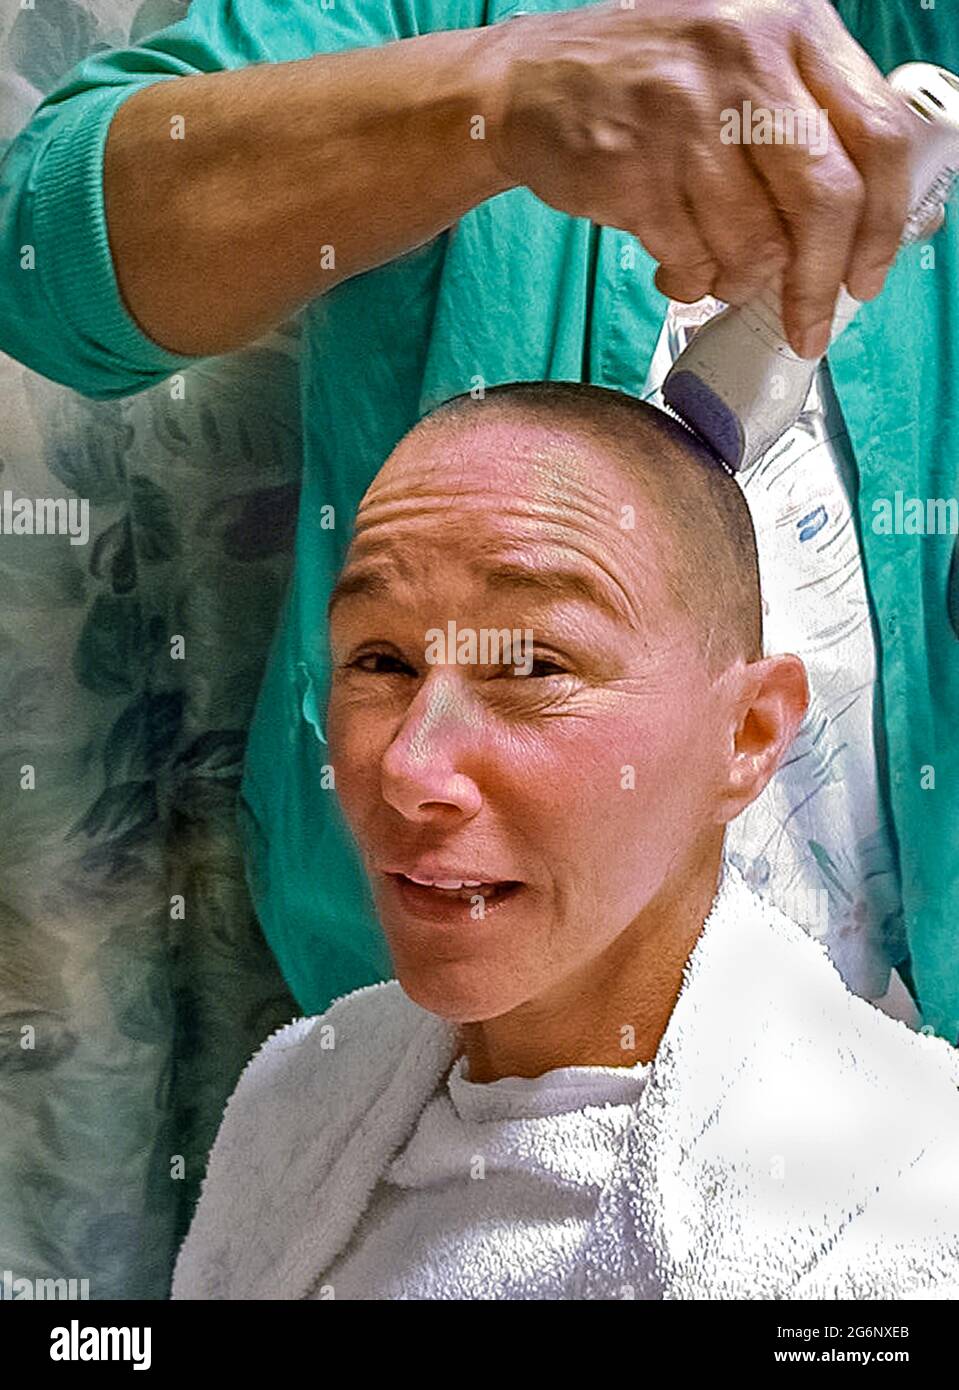 An American woman who suffers from epilepsy has her head shaved with an electric razor in a hospital prior to an operation on her brain. Her hair was totally removed before the surgeon cut into her scalp and skull (cranium) to perform a temporal lobectomy, a surgery that can lower the number of seizures, make them less severe, or even stop them from happening. During this medical procedure, the doctor removes some of the temporal lobe of her brain where most seizures start. (1st of 7 related images.) Model released. Stock Photo